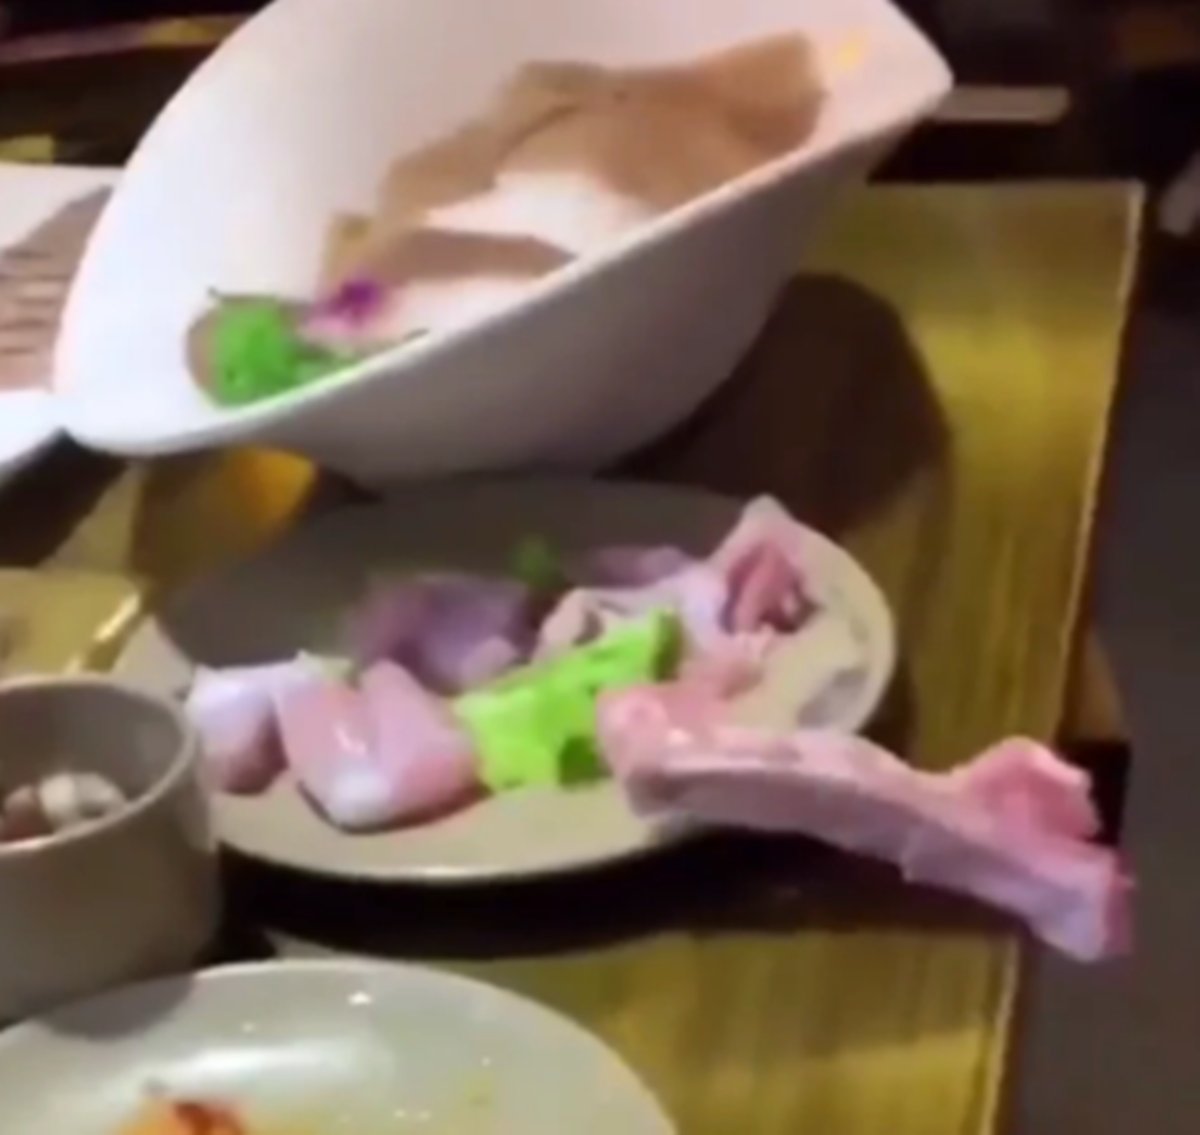 Disturbing Video Shows A Raw Piece Of Chicken Crawling Off Of A Restaurant Table